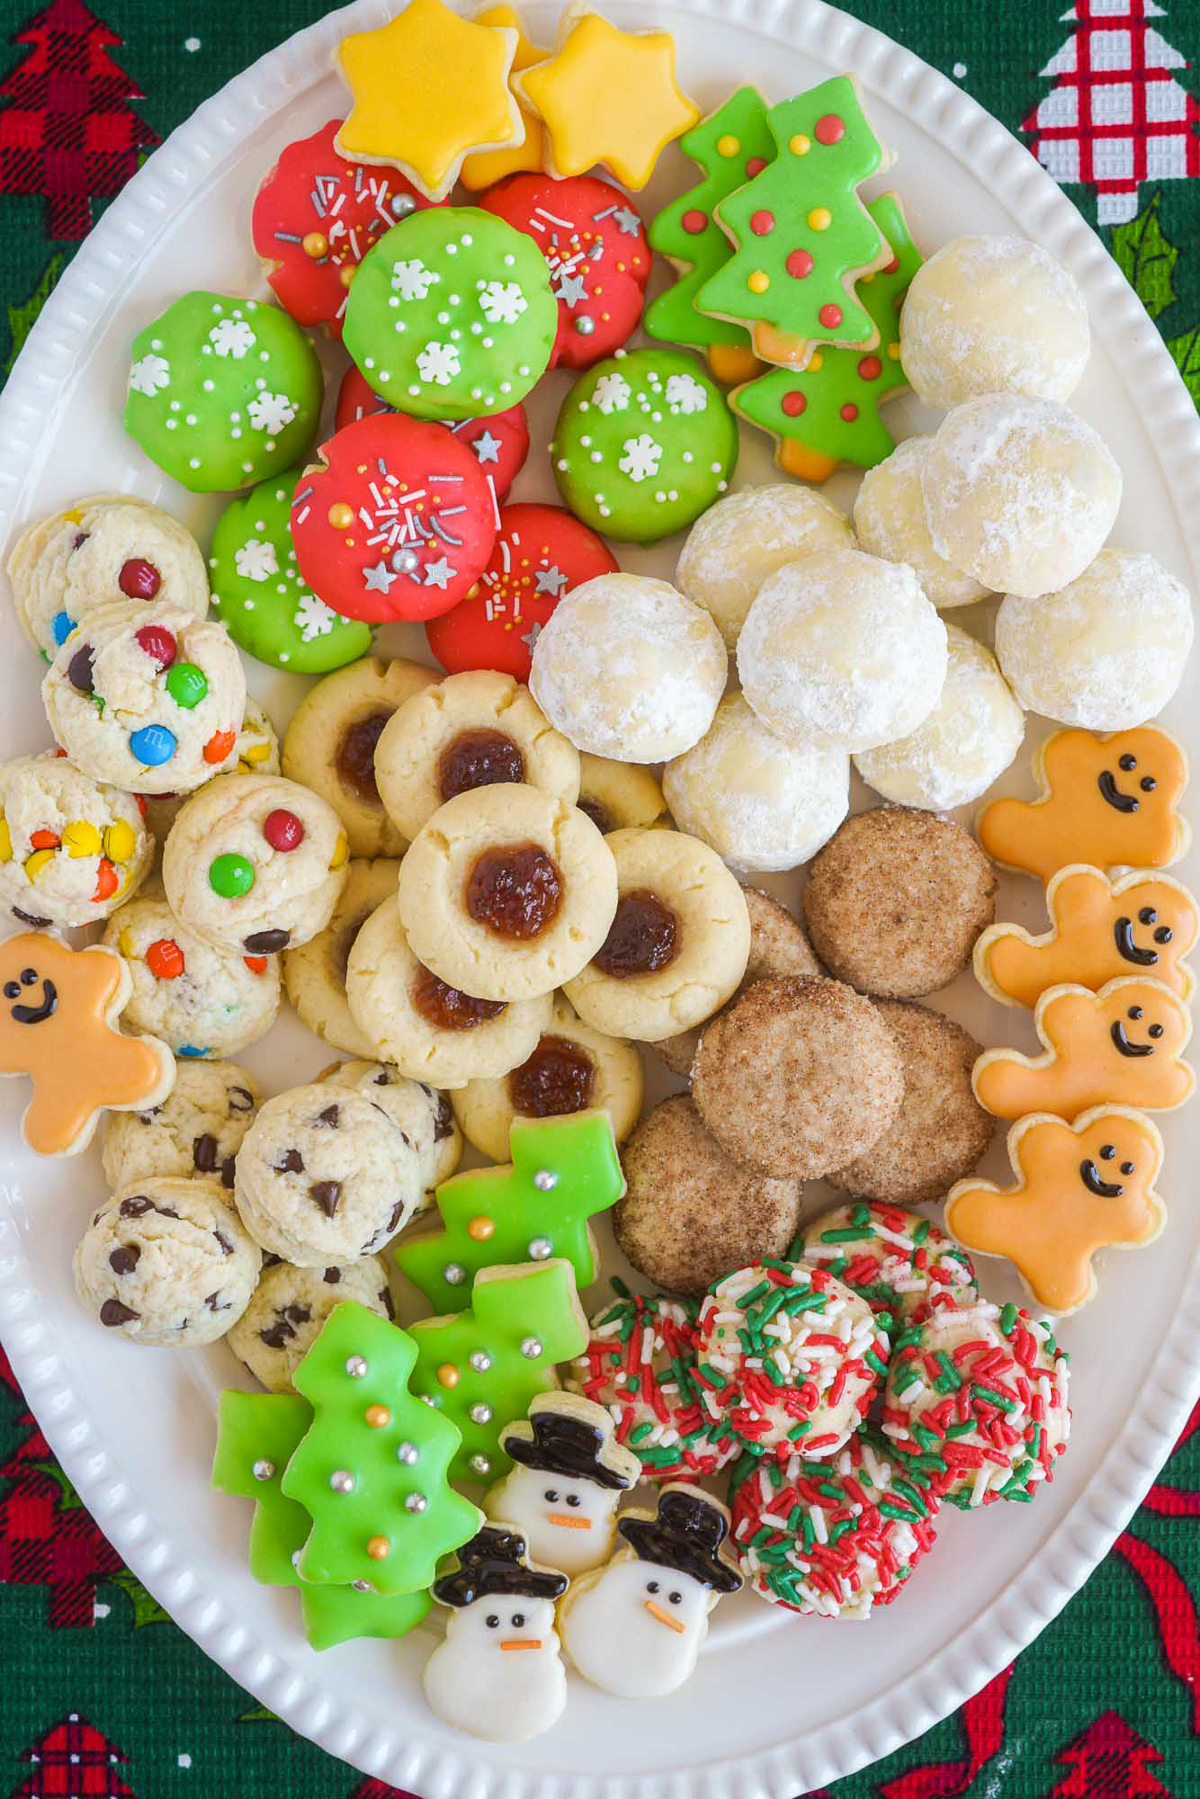 A large white oval platter with 8 kinds of assorted, Christmas decorated cookies in shades of white, red and green.